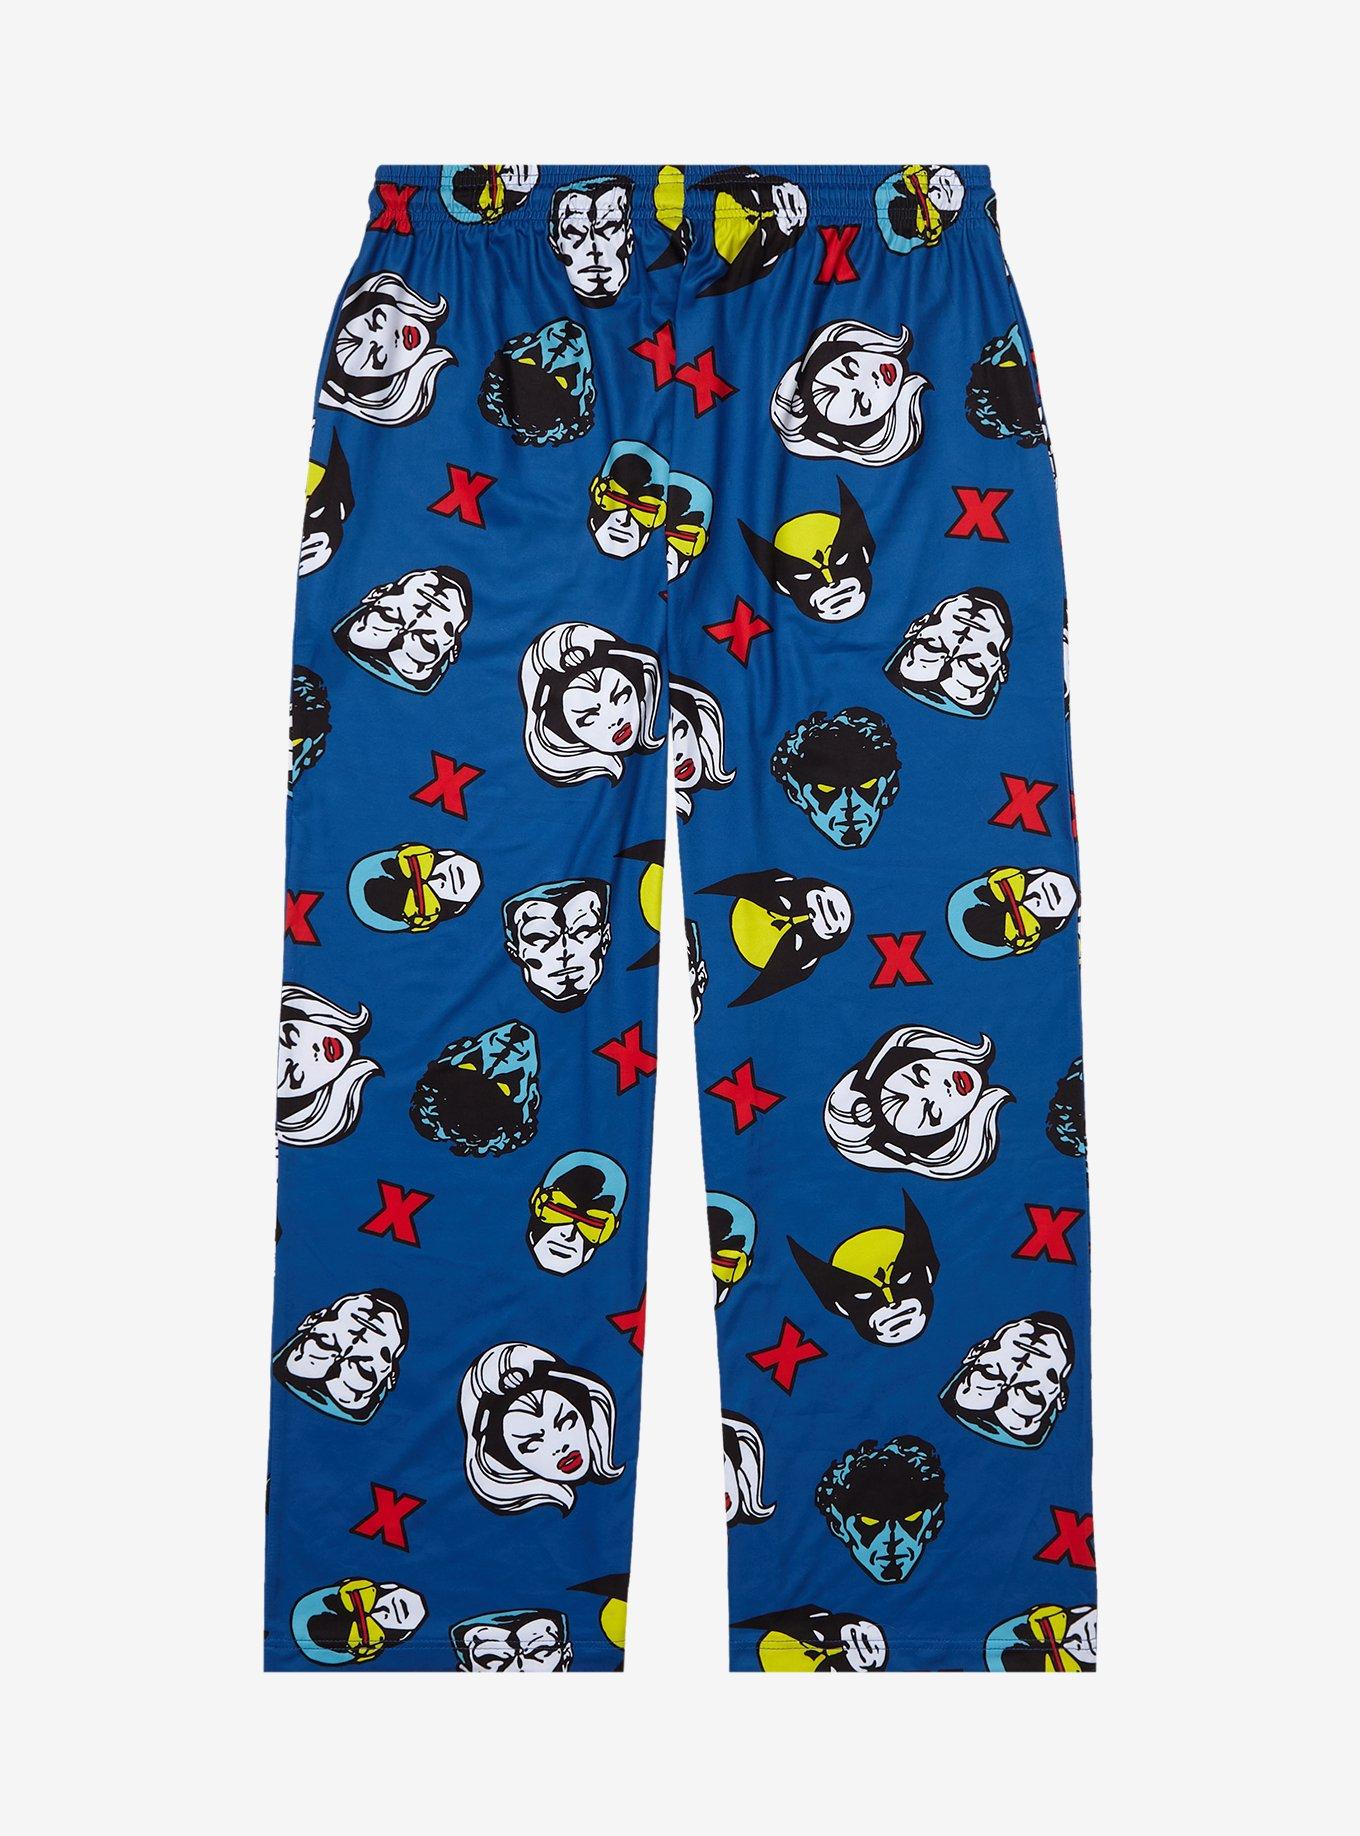 Marvel X-Men Character Portraits Allover Print Plus Size Sleep Pants - BoxLunch Exclusive, BLUE, alternate